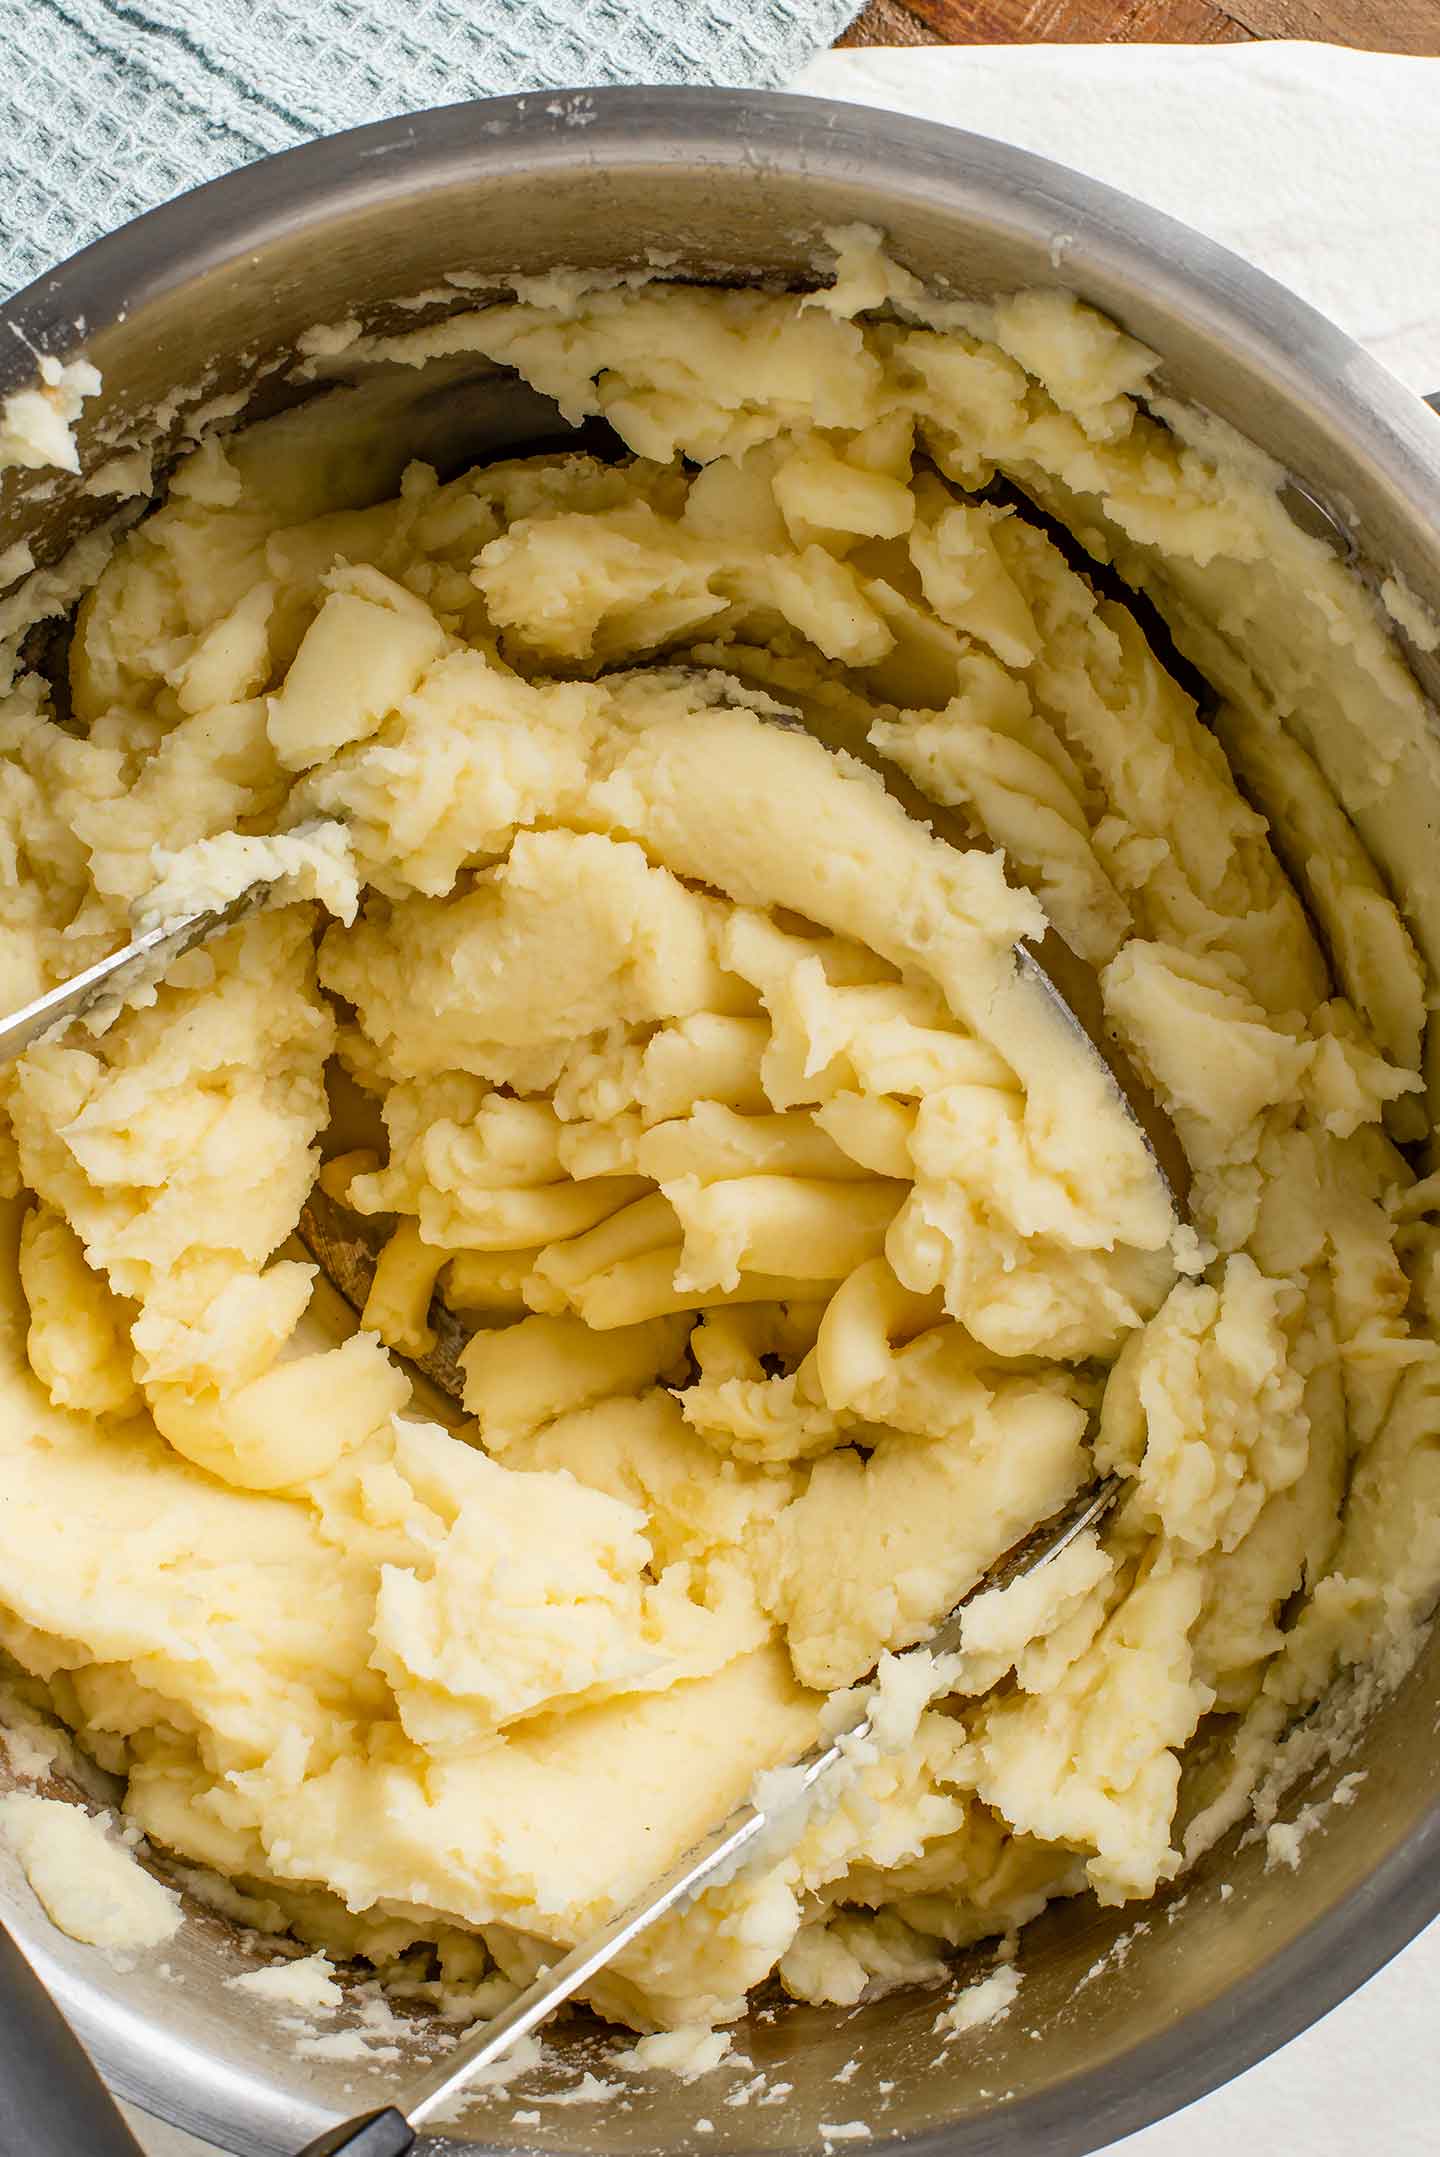 Top down view of vegan garlic mashed potatoes being mashed in a pot with a potato masher. The potatoes look fluffy and creamy.